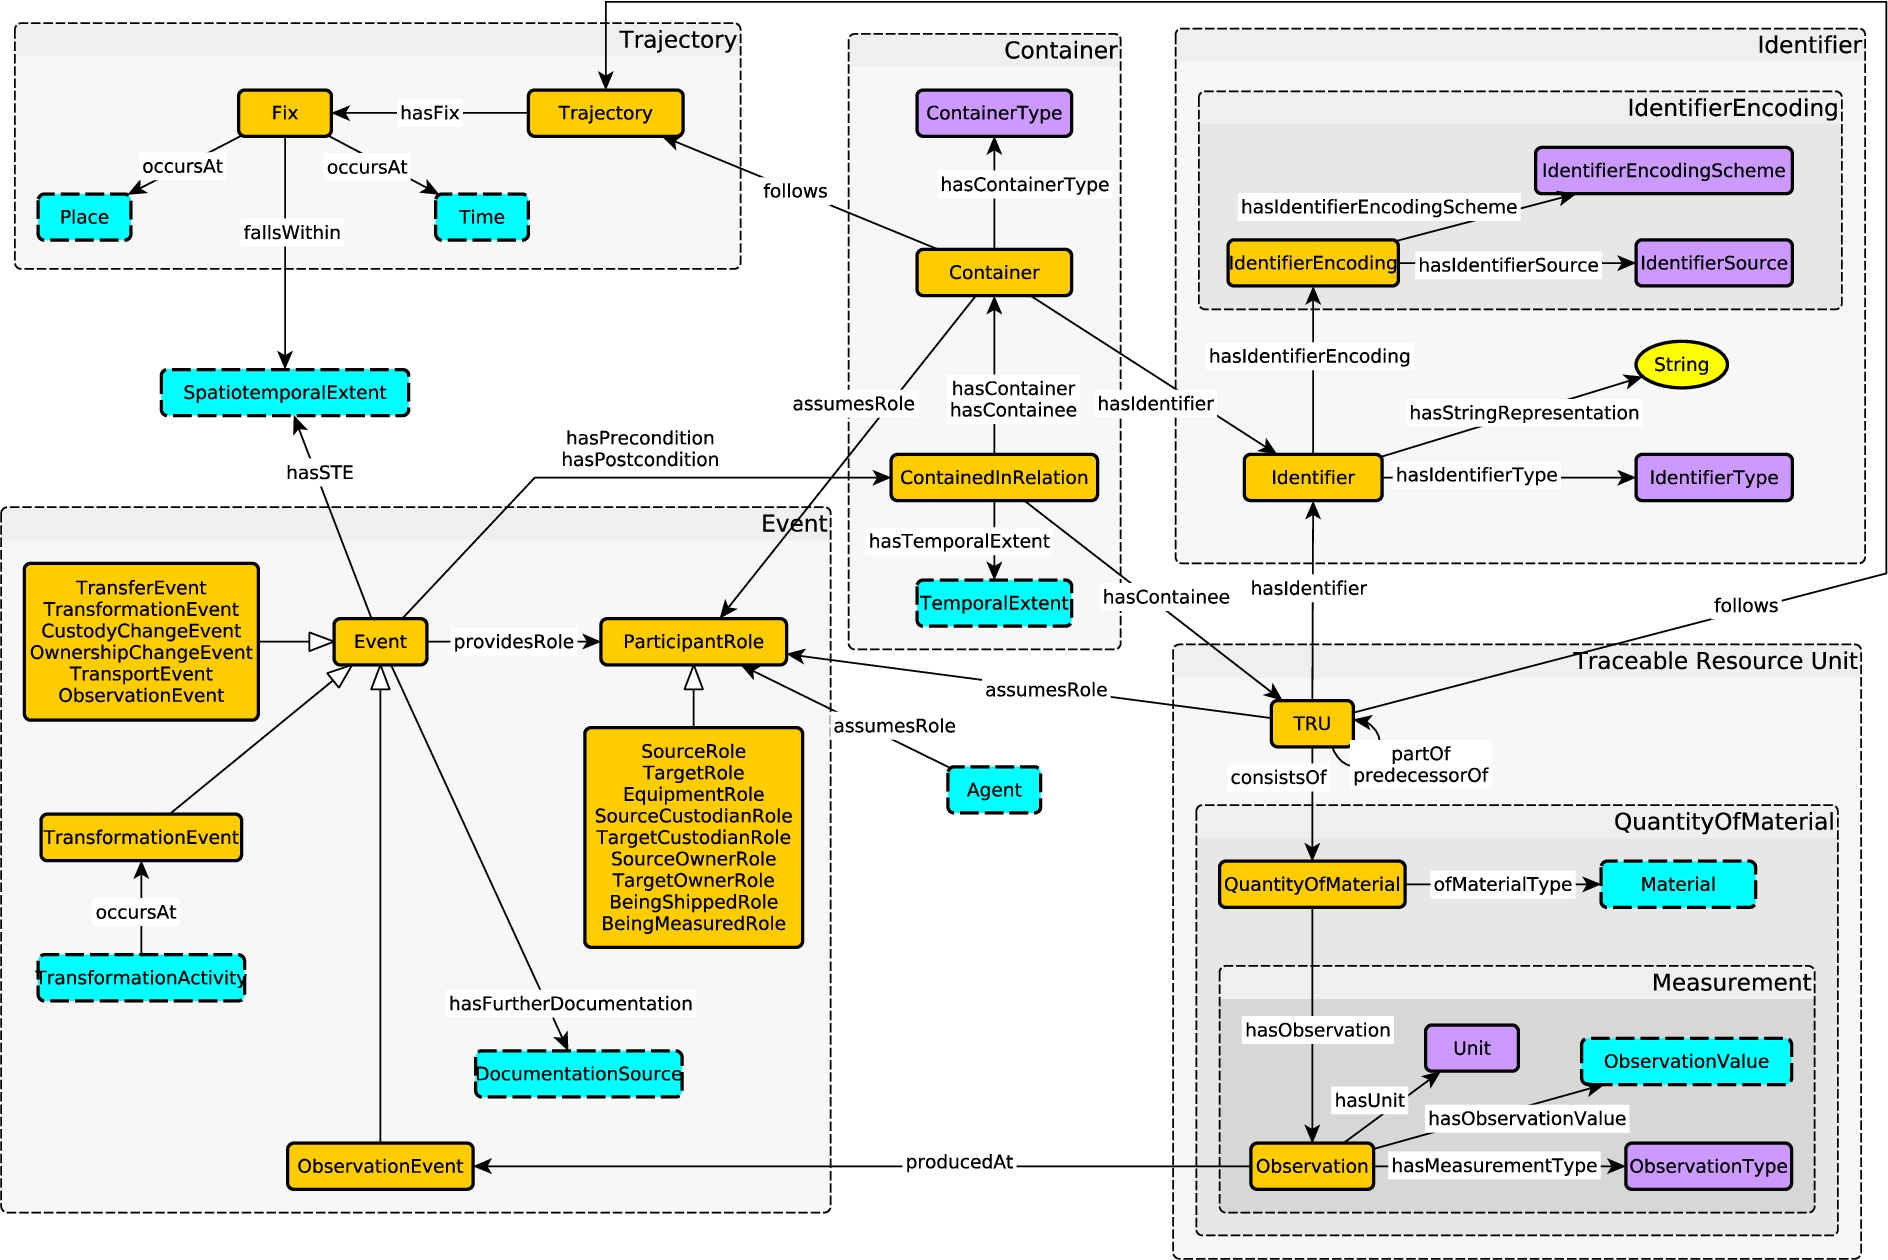 Schema diagram of a supply chain ontology currently under development by the authors.